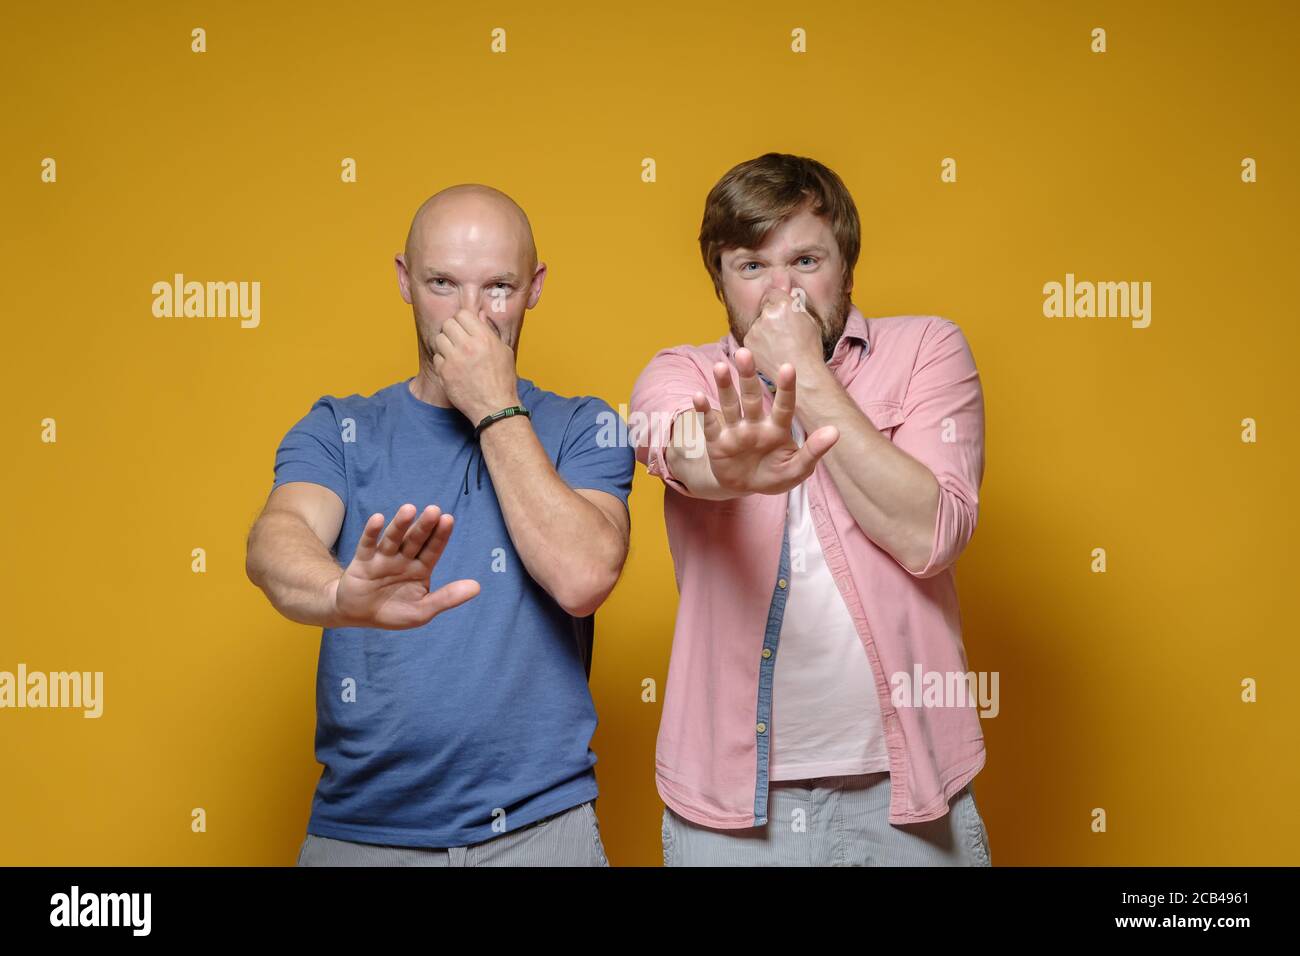 Two men feels a stinky, disgusting smell, they cover their nose with their hand and make a stop gesture with their palm.  Stock Photo